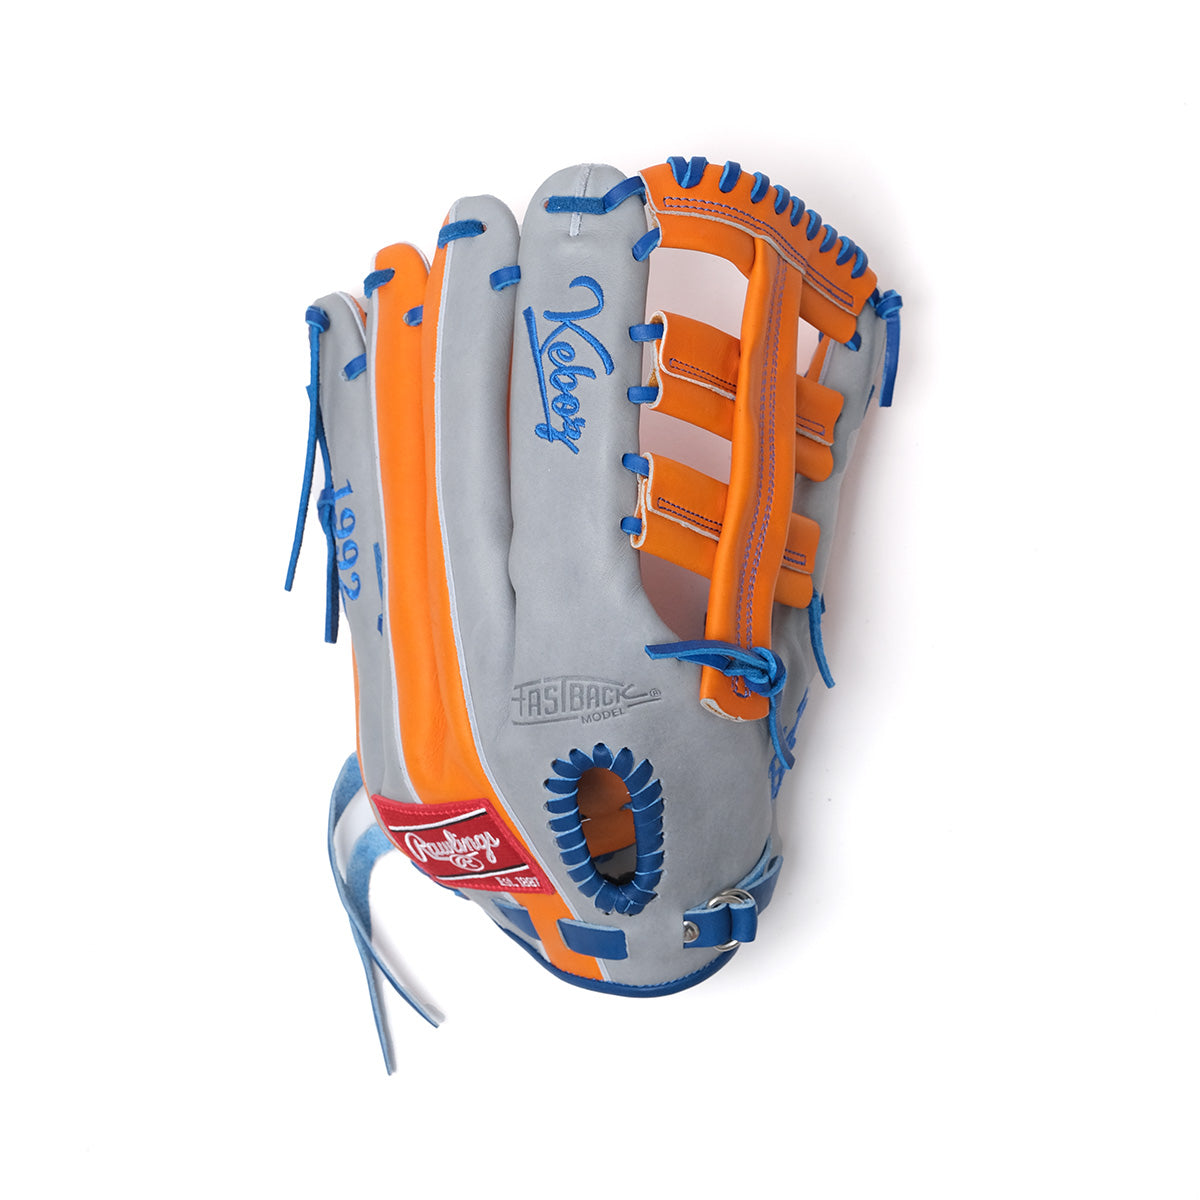 RAWLINGS OUTFIELDER GLOVE CUSTOMIZED BY KEBOZ